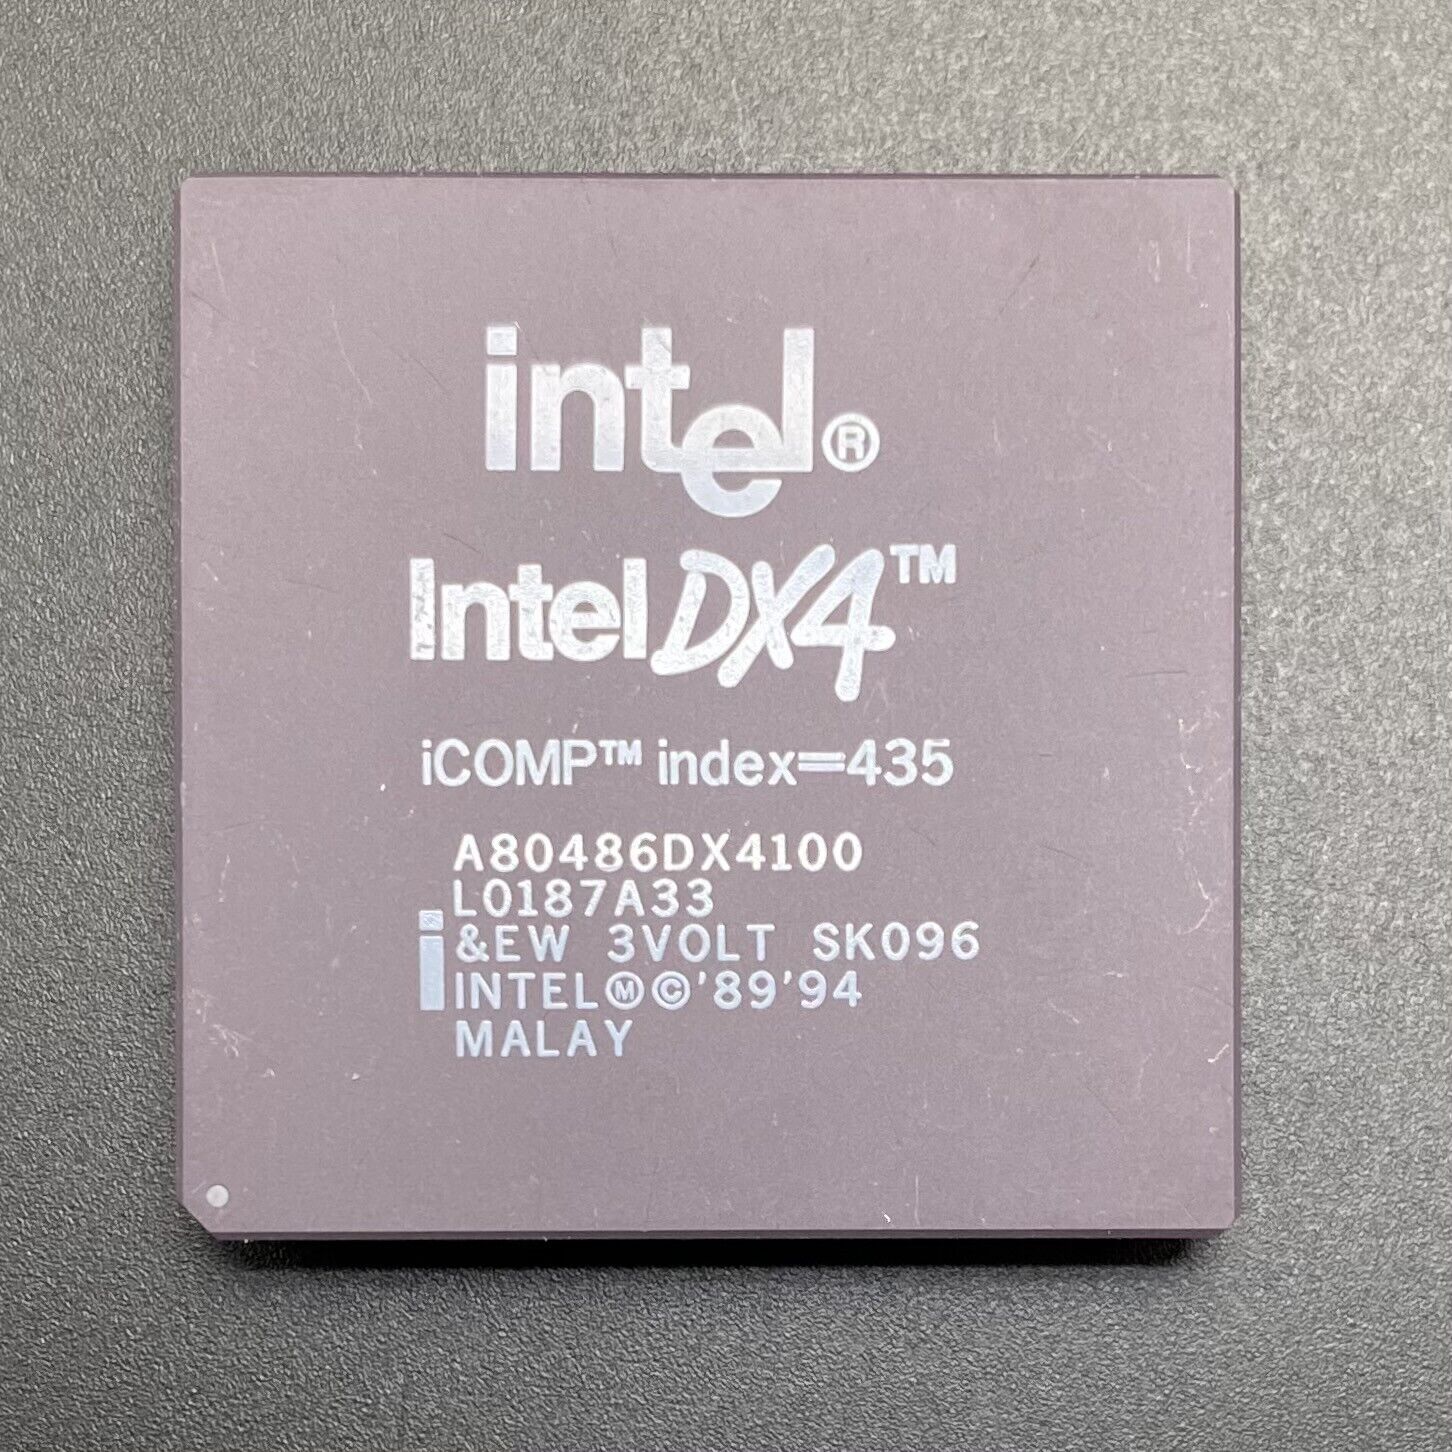 Intel A80486DX4-100 CPU SK096 100MHz High-Frequency 486 Processor PGA168 Tested